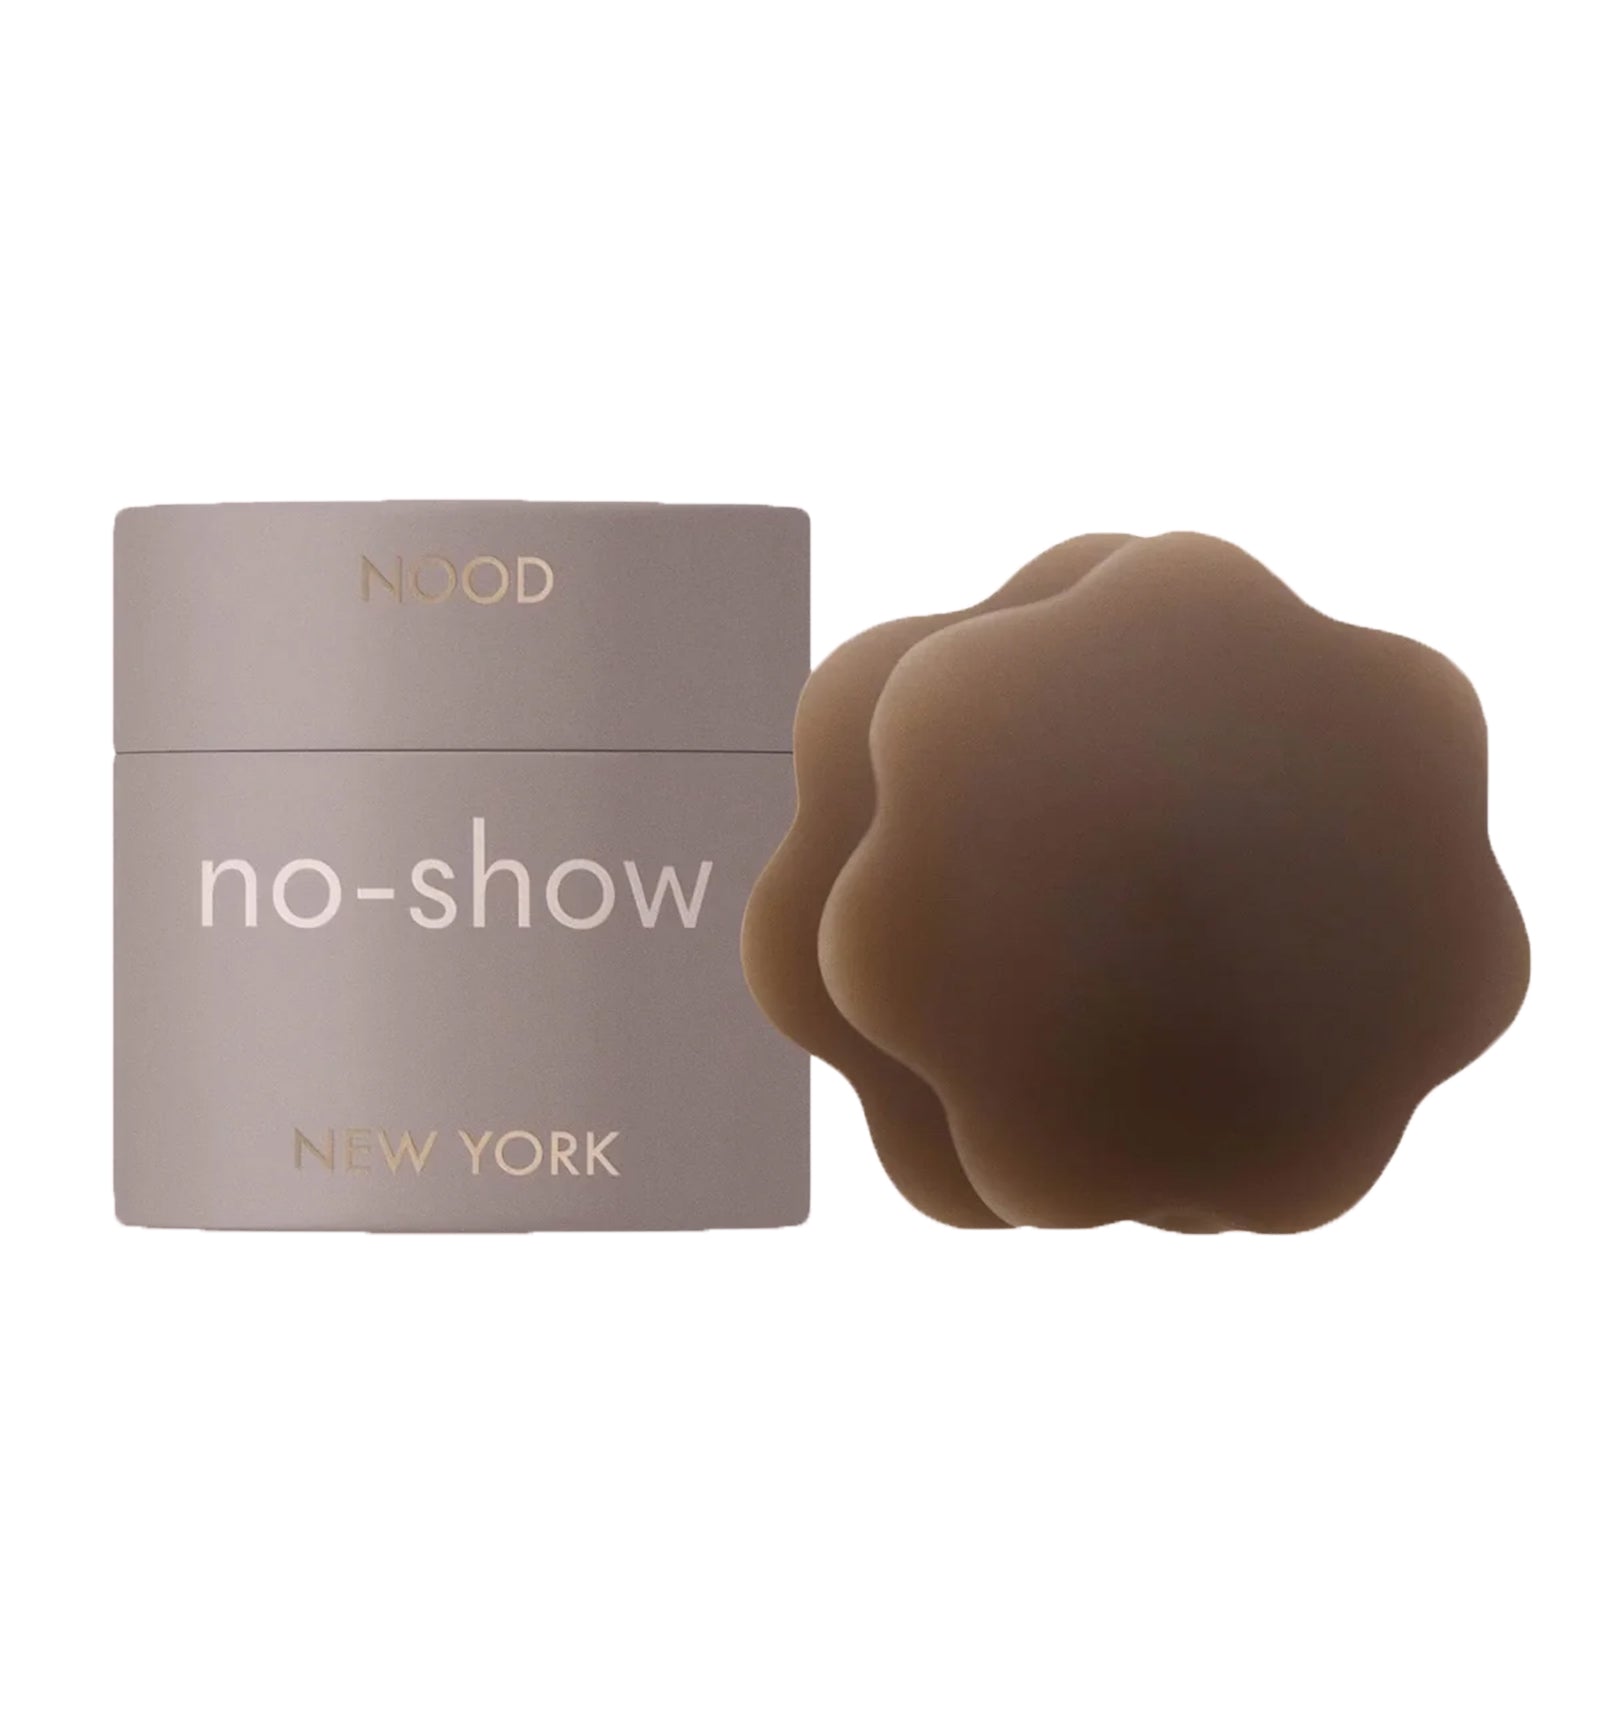 NOOD No-Show Nipple Covers,Nood 9 - Nood 9,One Size